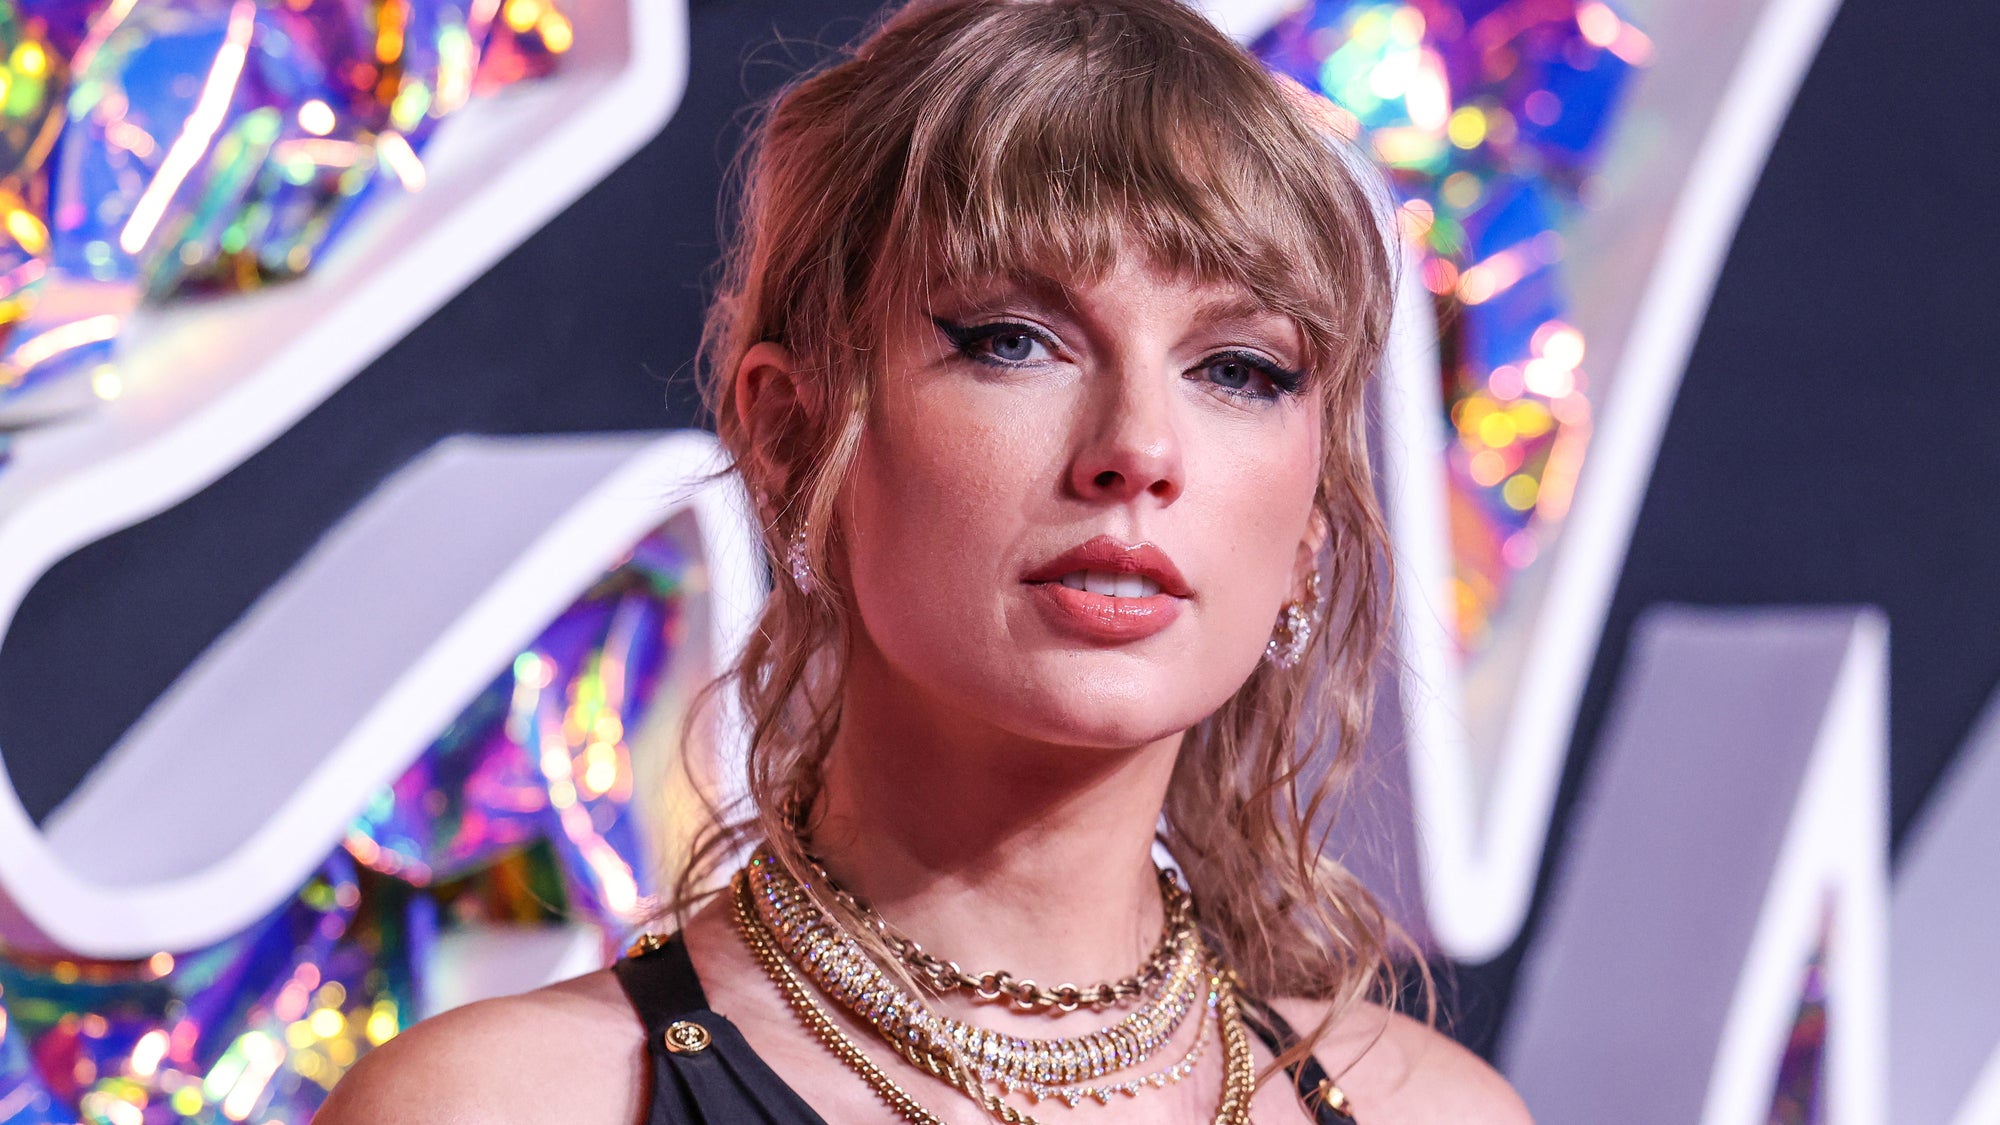 AI-generated Taylor Swift porn deepfakes ran rampant on X. Will laws catch up?